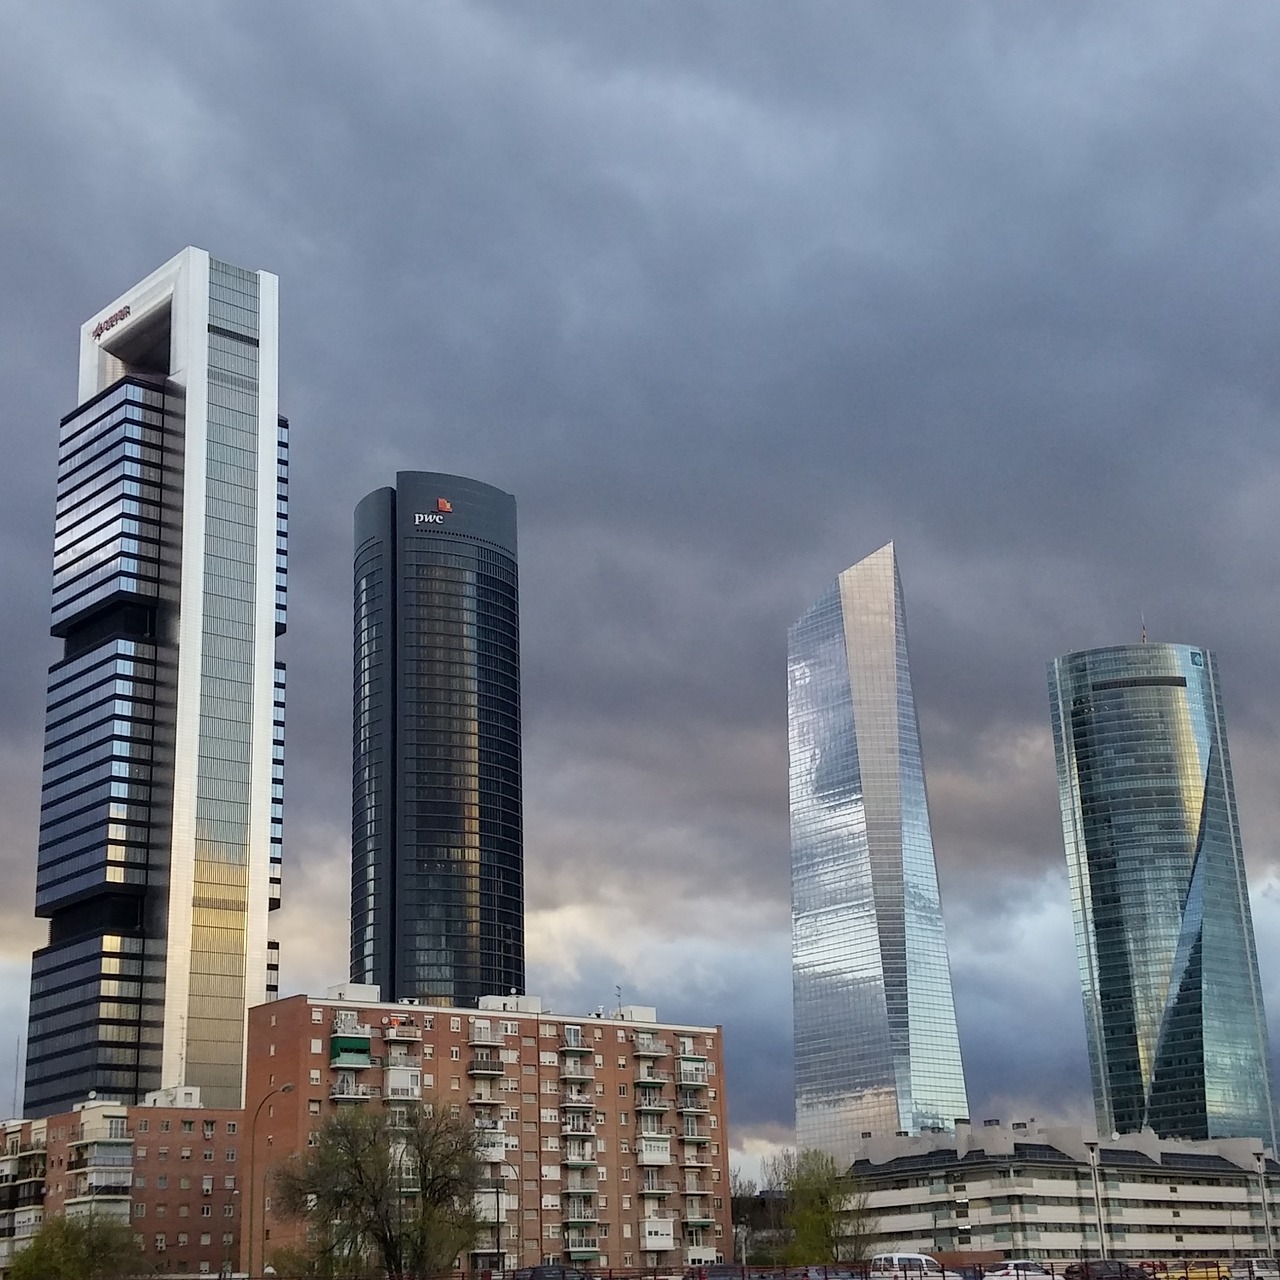 madrid cloudy tower free photo